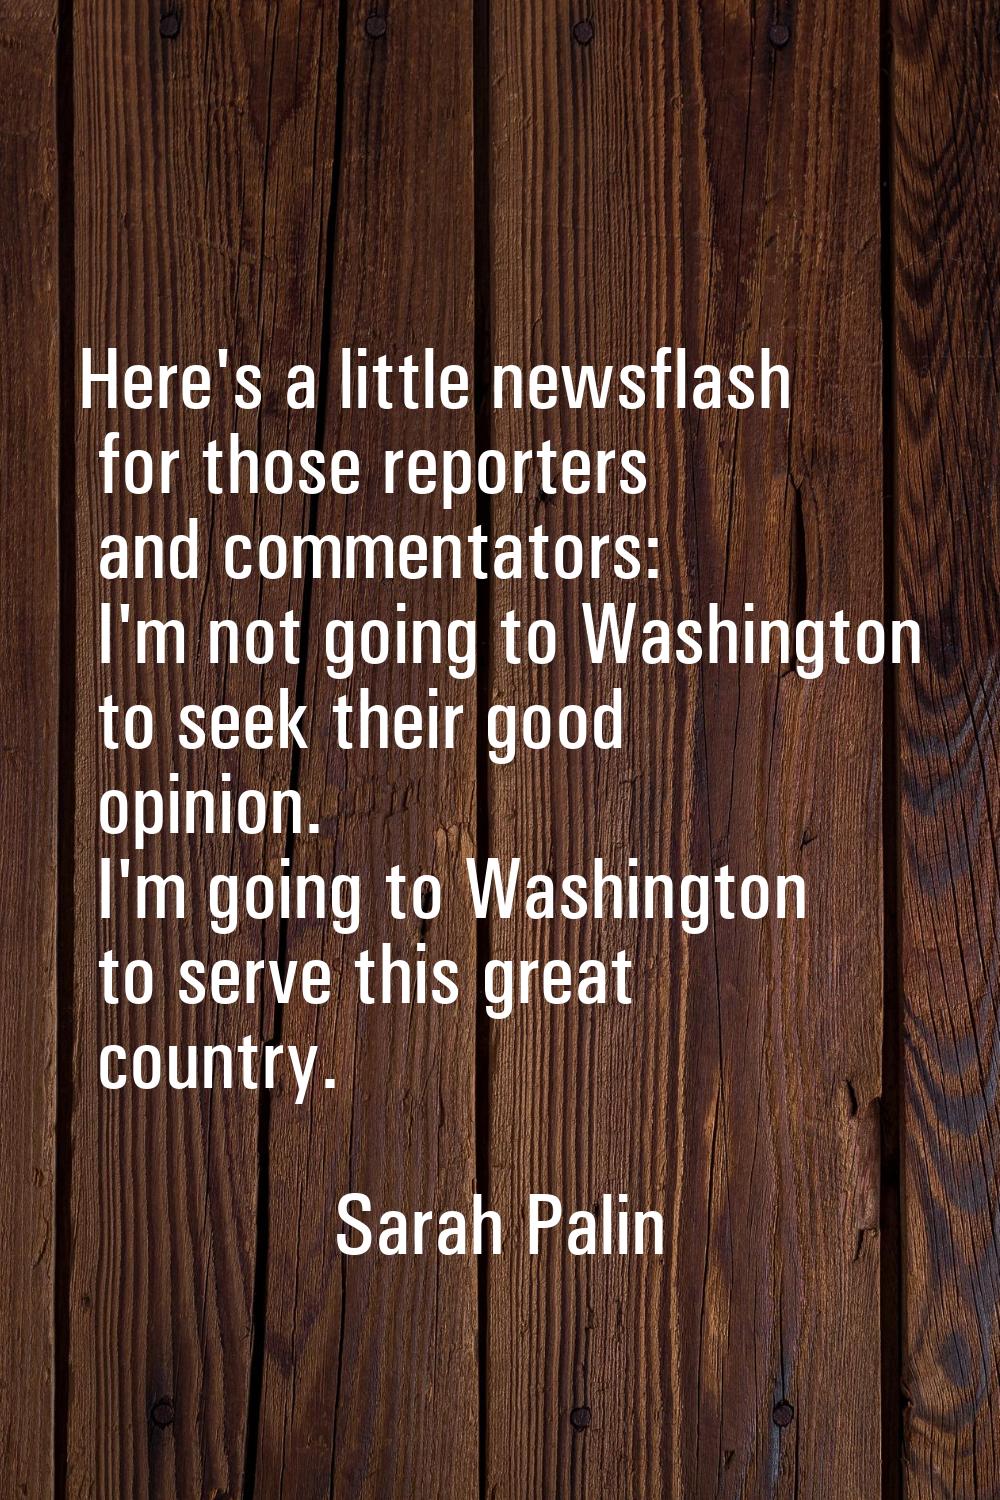 Here's a little newsflash for those reporters and commentators: I'm not going to Washington to seek